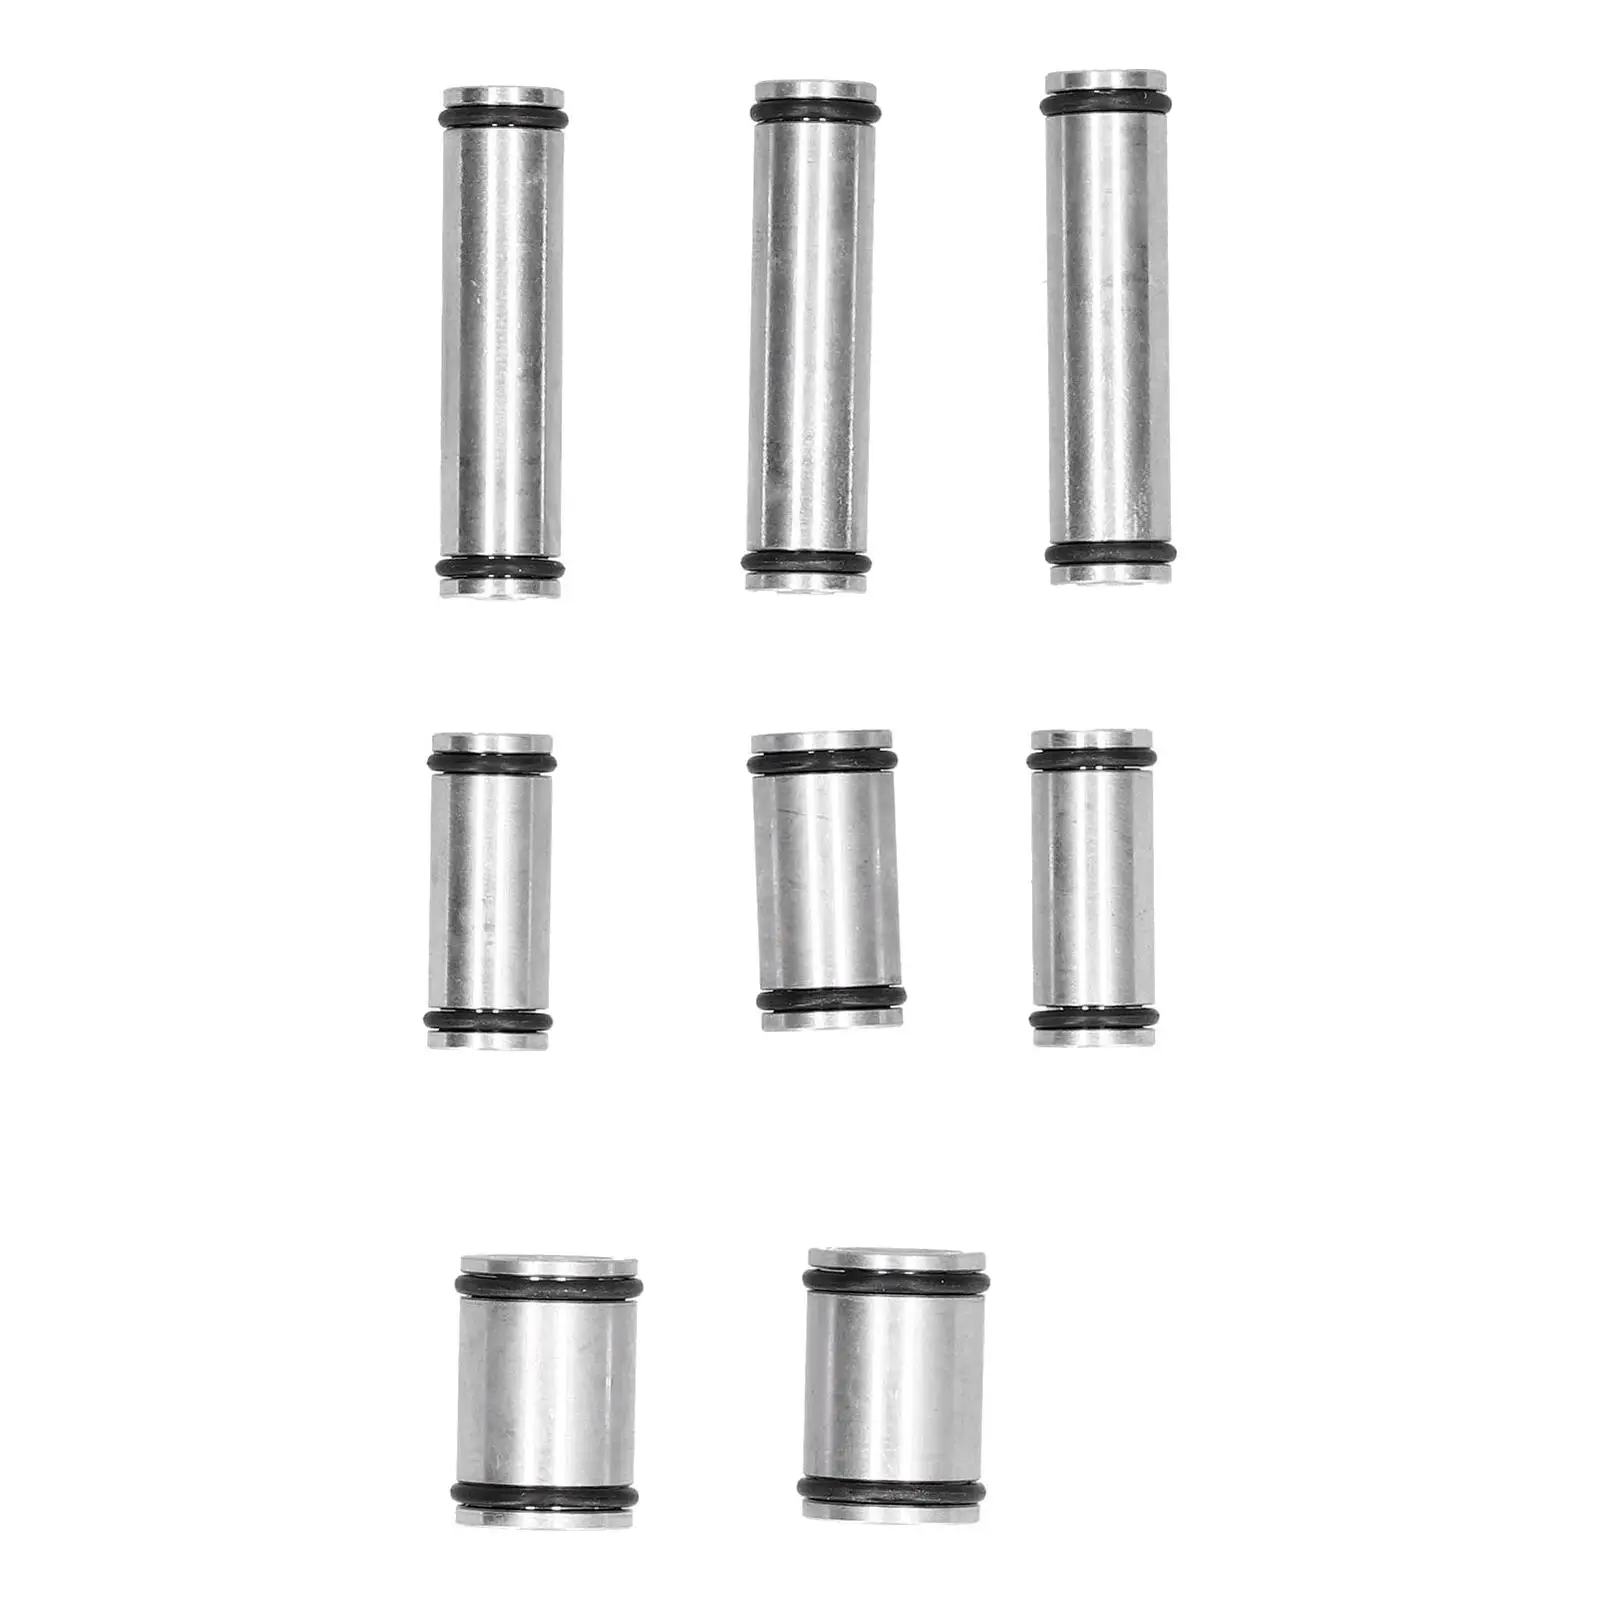 8Pcs Car Oil Pipe Kit Replacement 0BH321477 Metal Dq500 0BH for R8